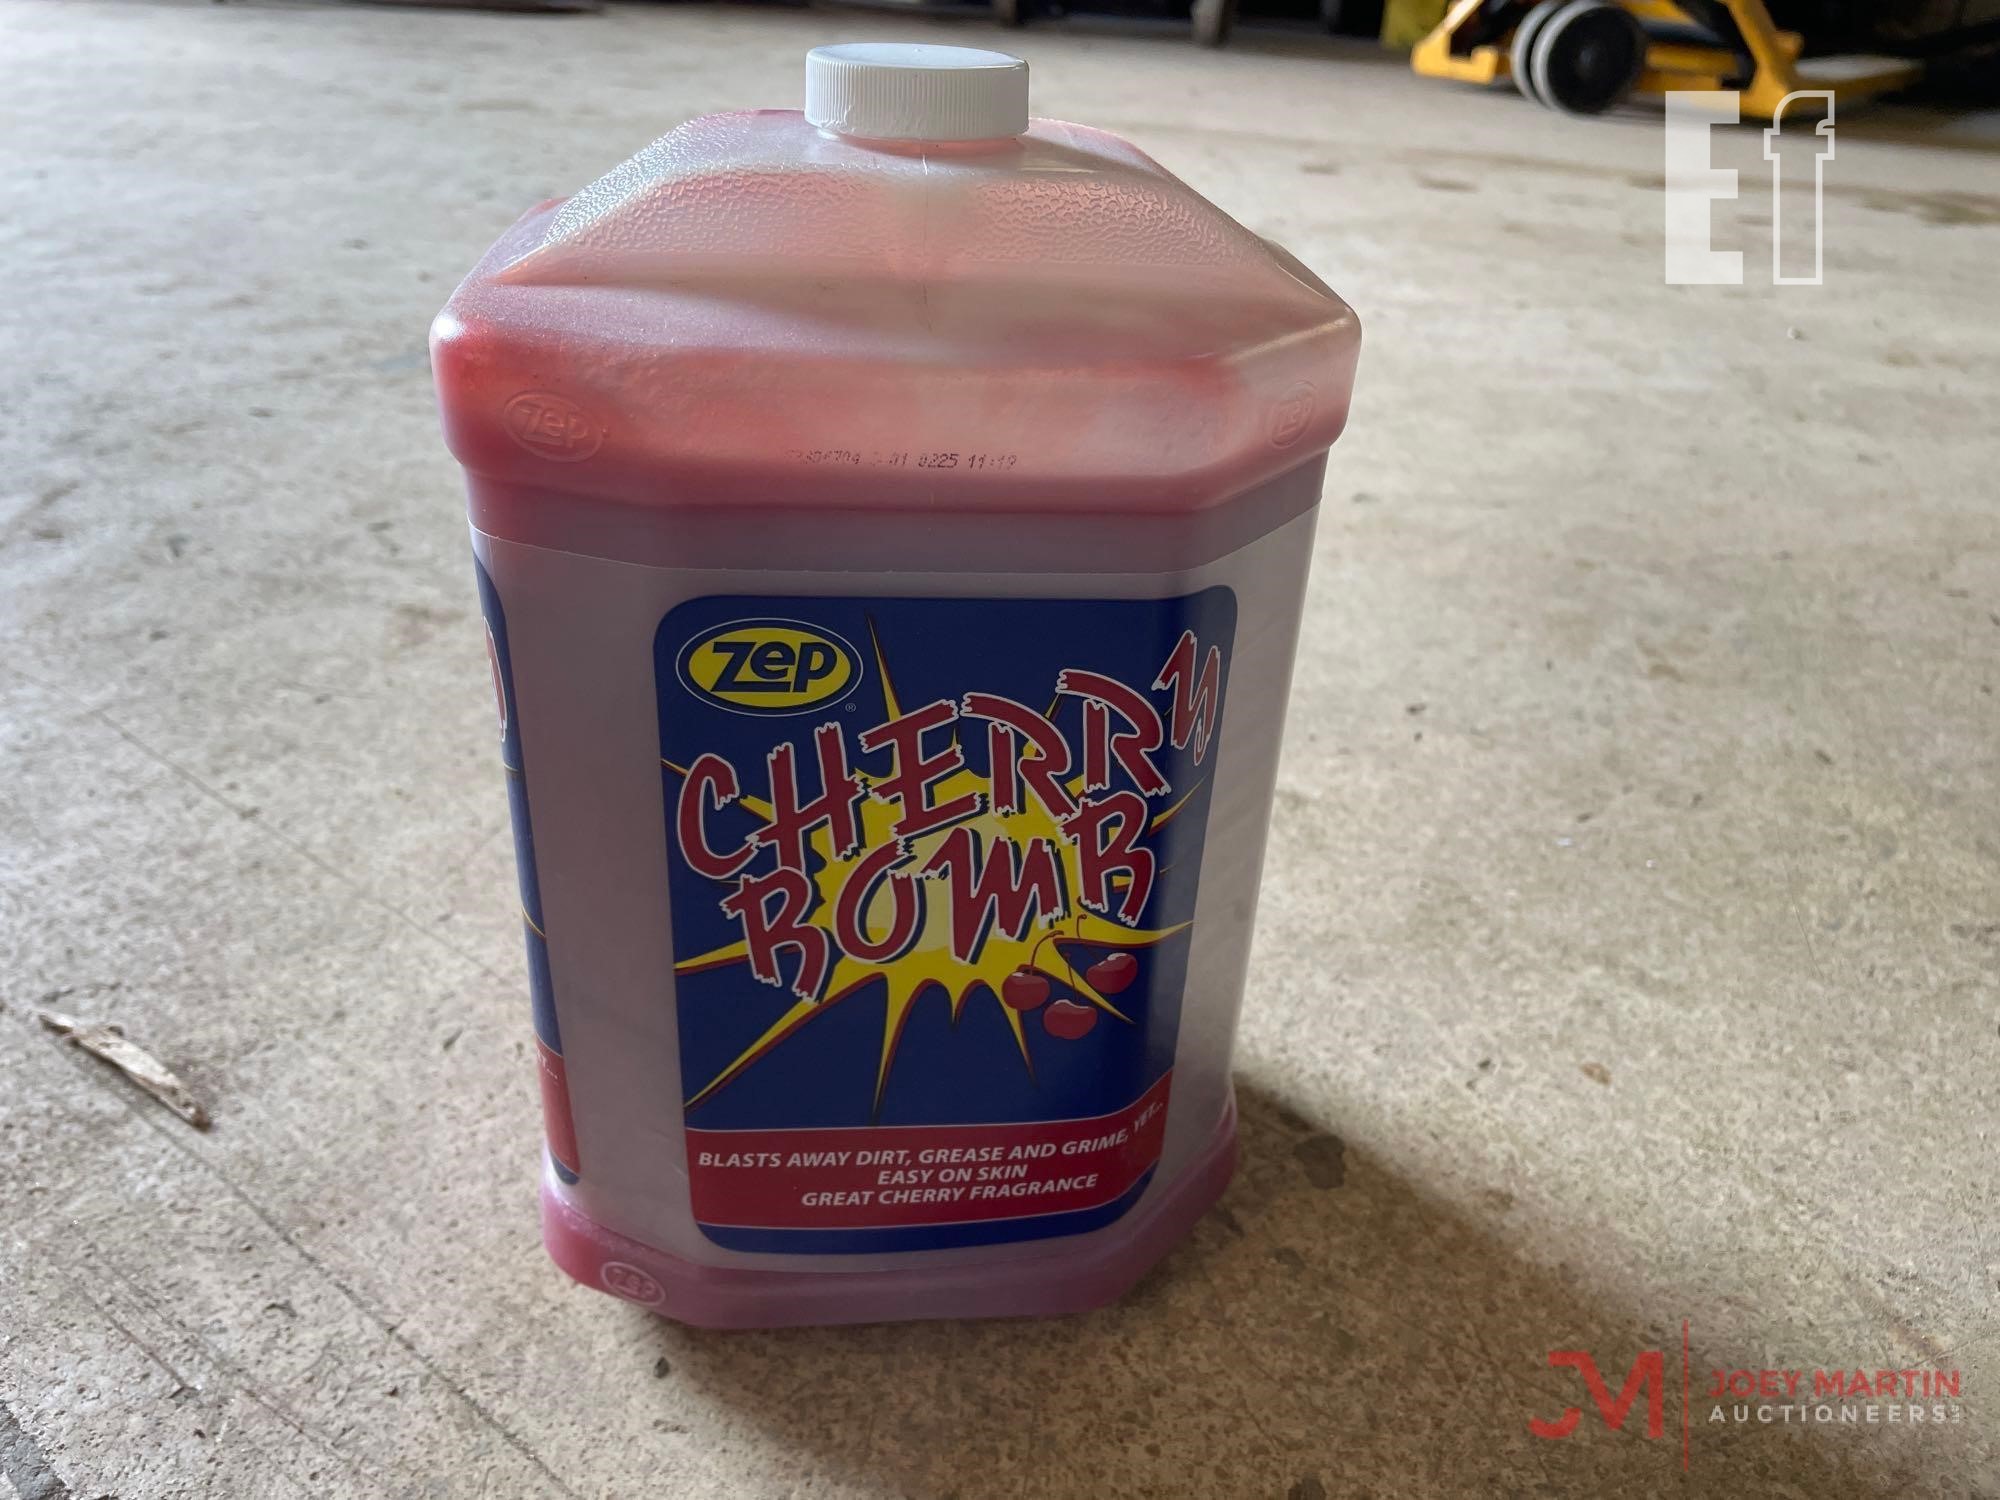 4) 1 GALLON JUGS OF ZEP CHERRY BOMB HAND CLEANER, Online Auction Results